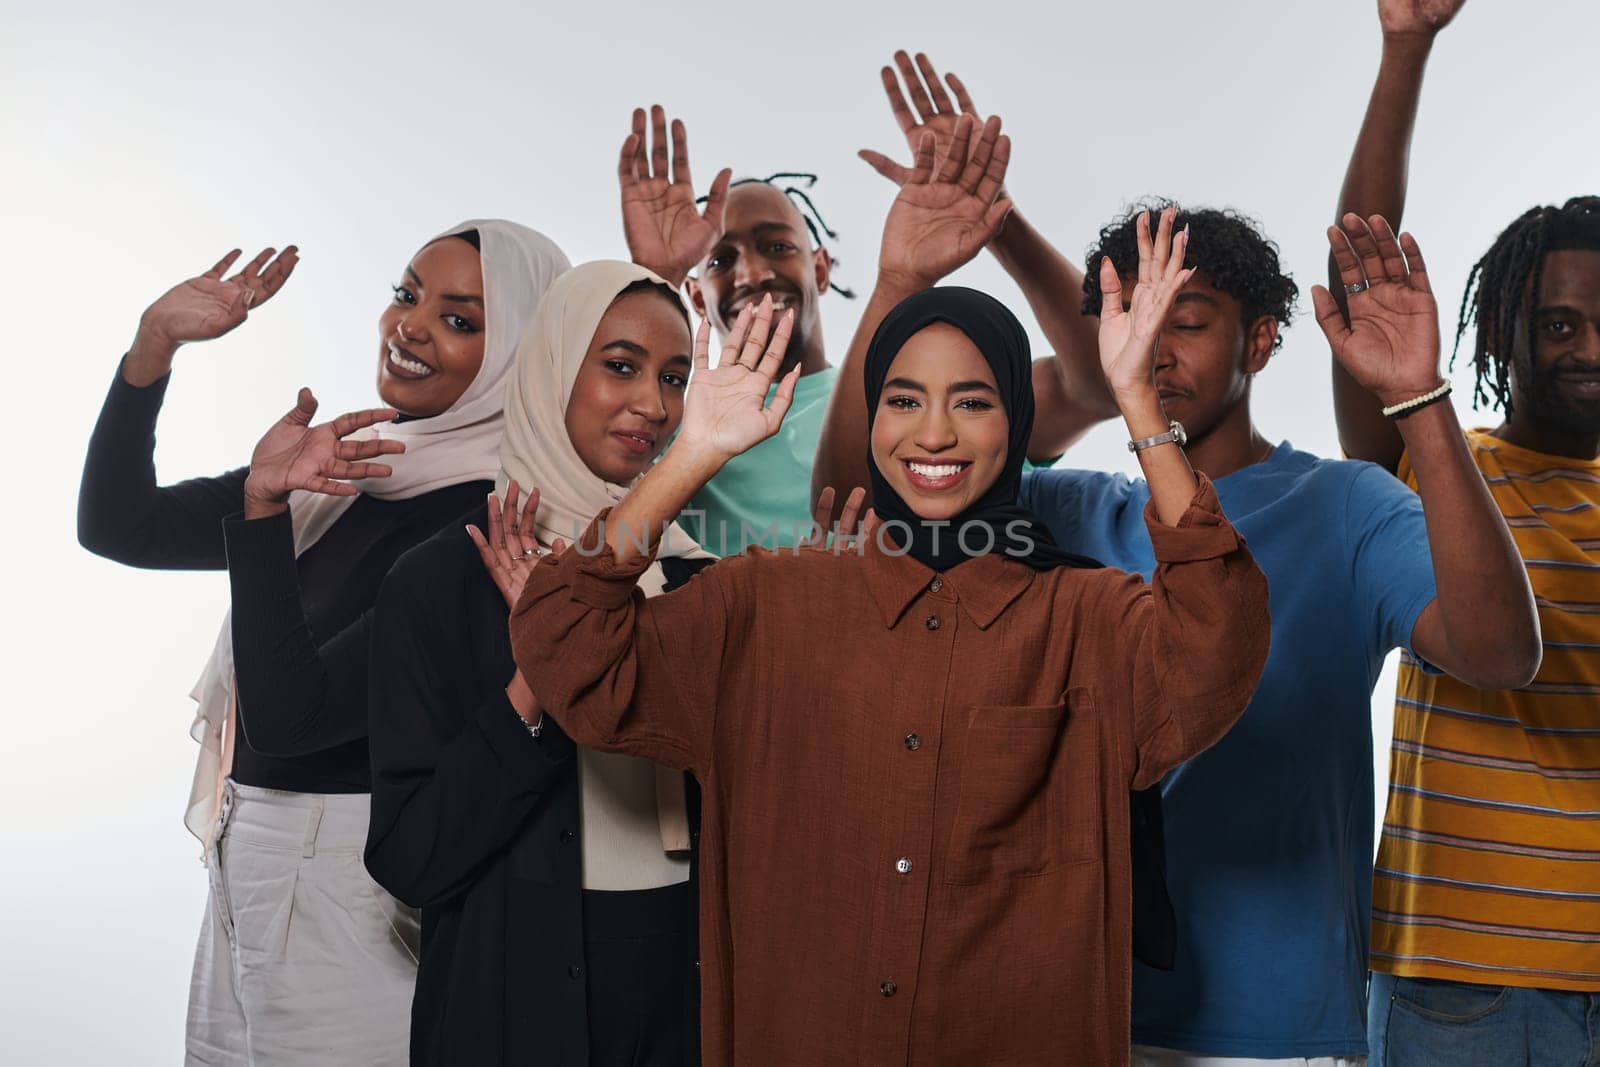 A jubilant and diverse group, including an African American man and hijab-wearing girls, exuberantly wave and celebrate, embodying the vibrancy of student life against a white backdrop, symbolizing unity, cultural diversity, and the joyous spirit of shared experiences by dotshock